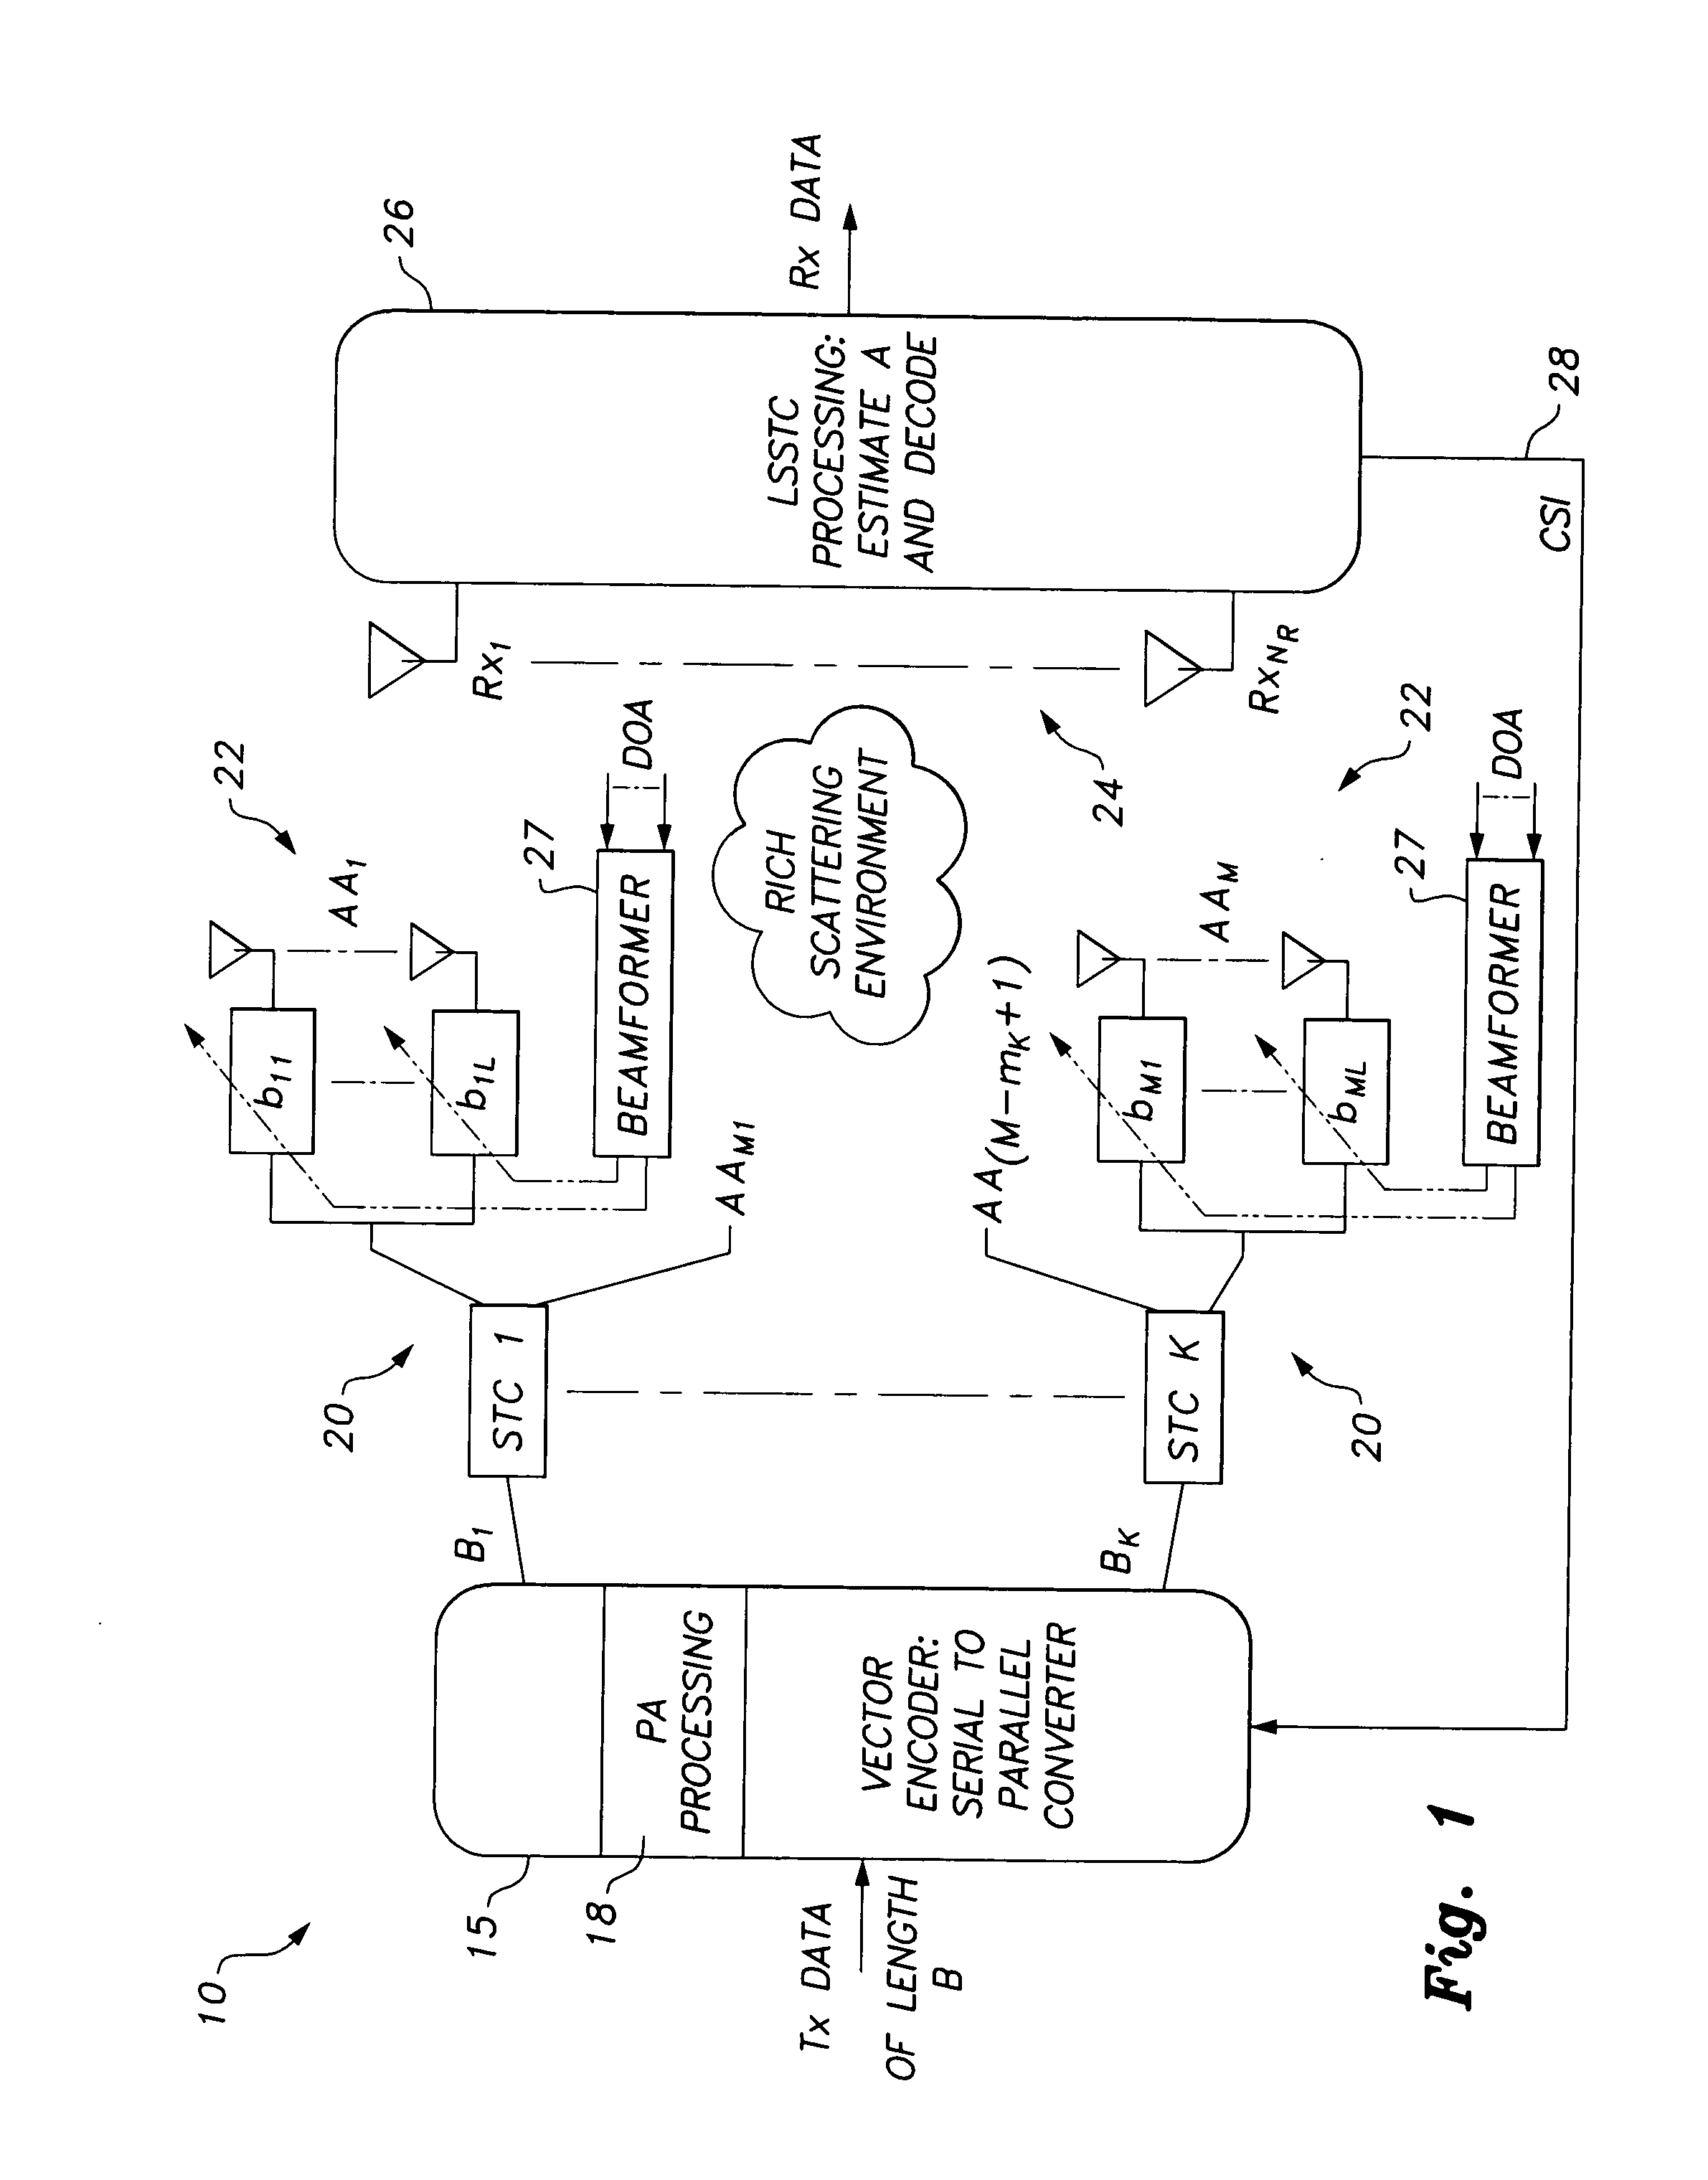 Optimal power allocation method for an LSSTC wireless transmission system